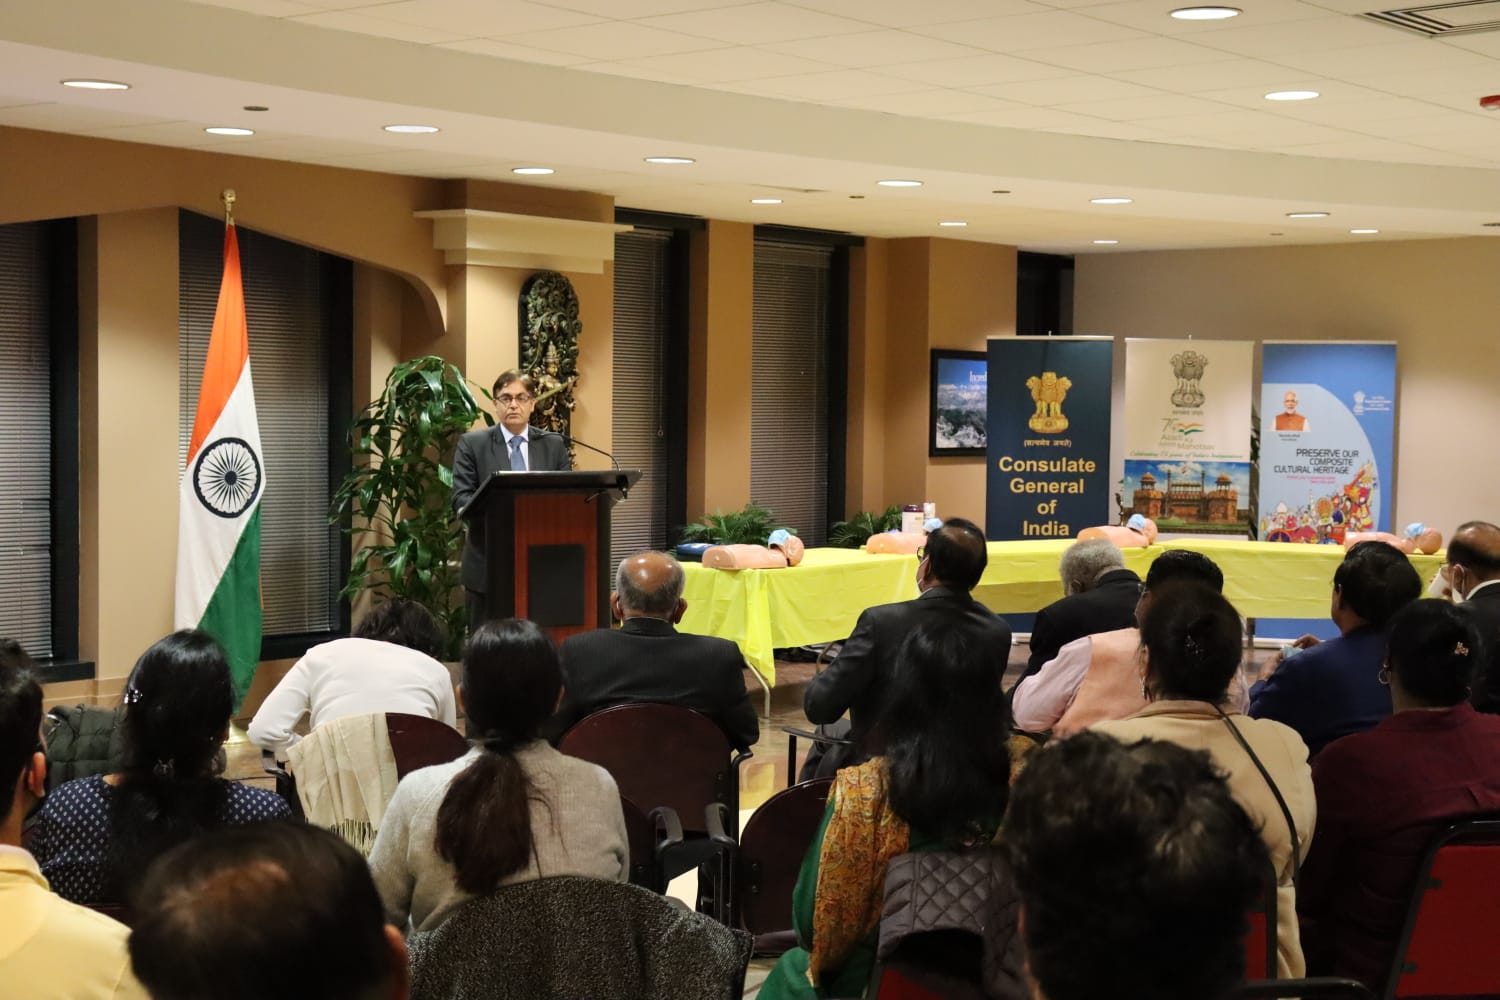 "Heart Health Awareness programme" organised at the Consulate premises on 15 December 2021.